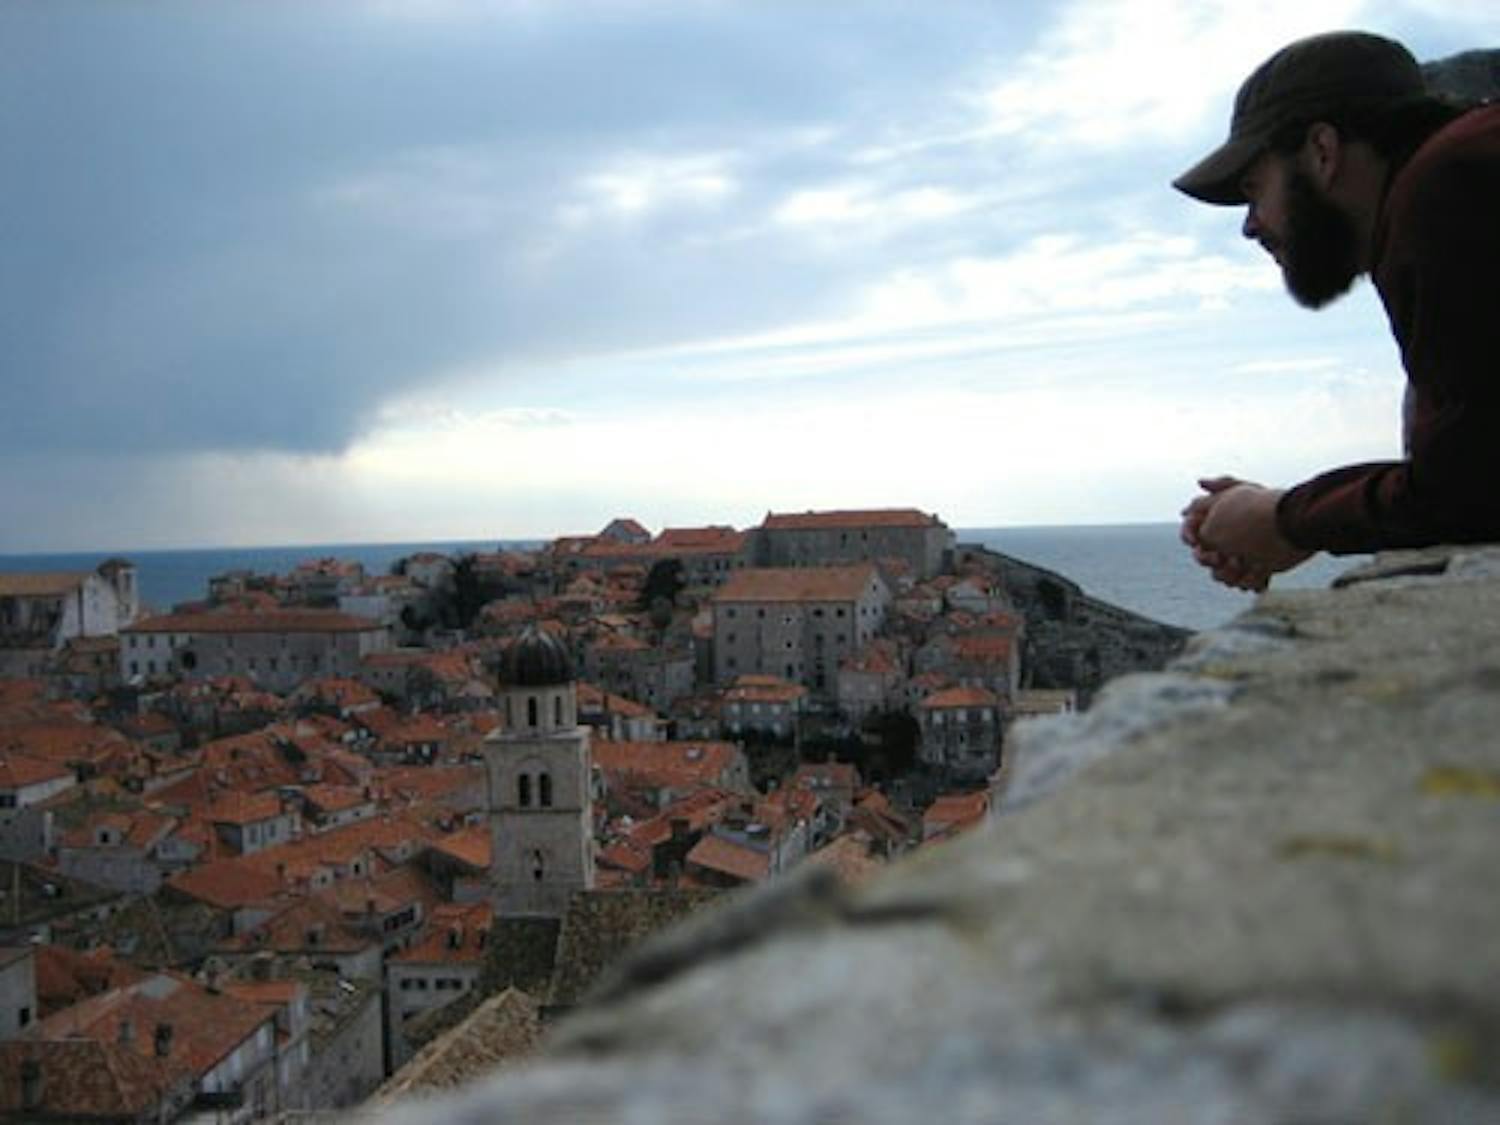 Courtesy Photo
Former IUSA President, Alex Shortle, looks over Dubrovnik, Croatia in Feb. 2006.  Shortle traveled from Ireland to Turkey during his year off from school.  He will return to IU as a senior in the fall.